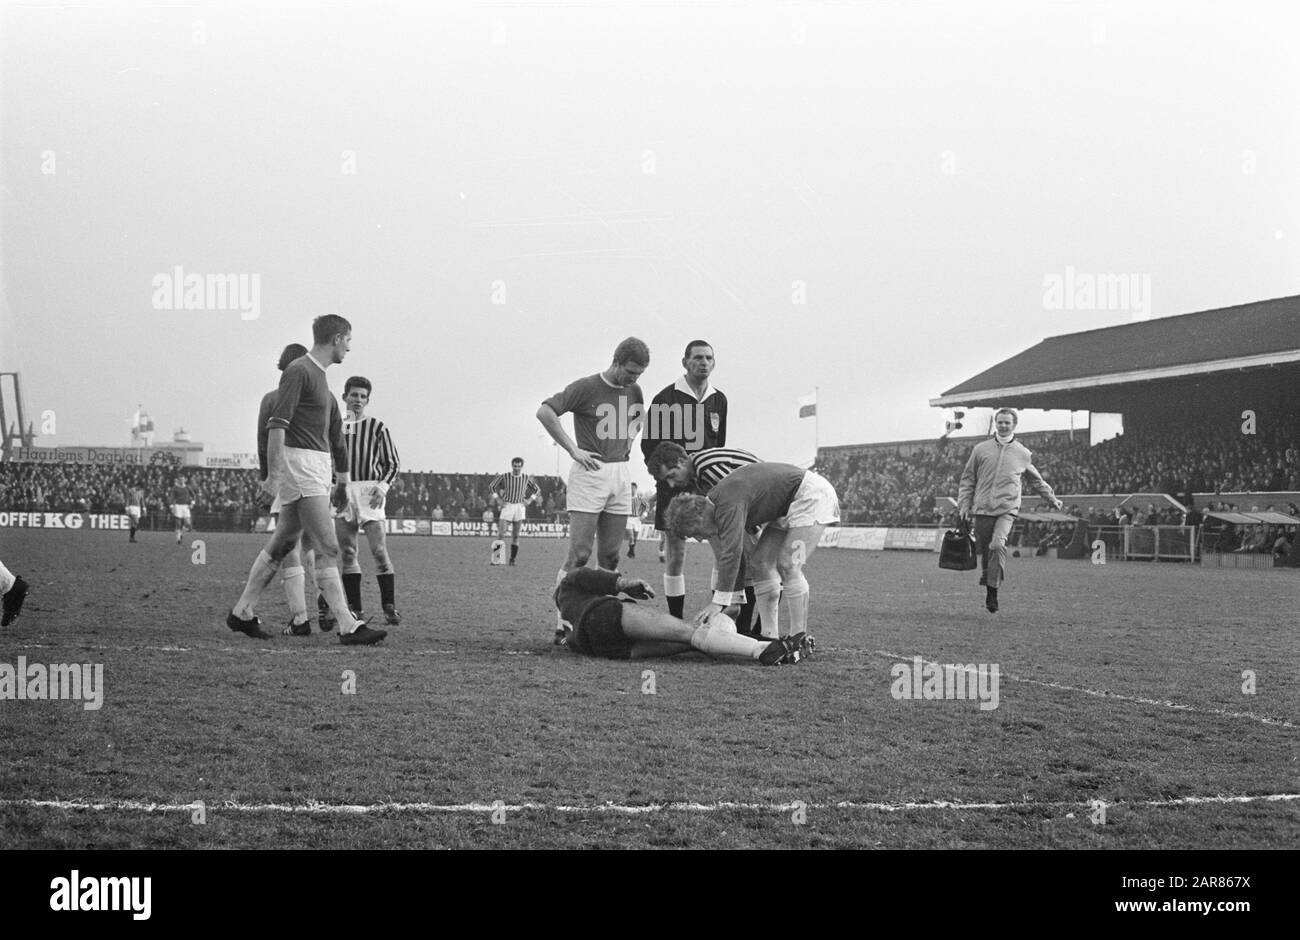 RCH against Vitesse 1-0. caregiver comes field up to help injured goalkeeper Date: January 5, 1969 Location: Heemstede Keywords: sport, football Institution name: RCH, Vitesse  : Verhoeff, Bert/Anefo Stock Photo